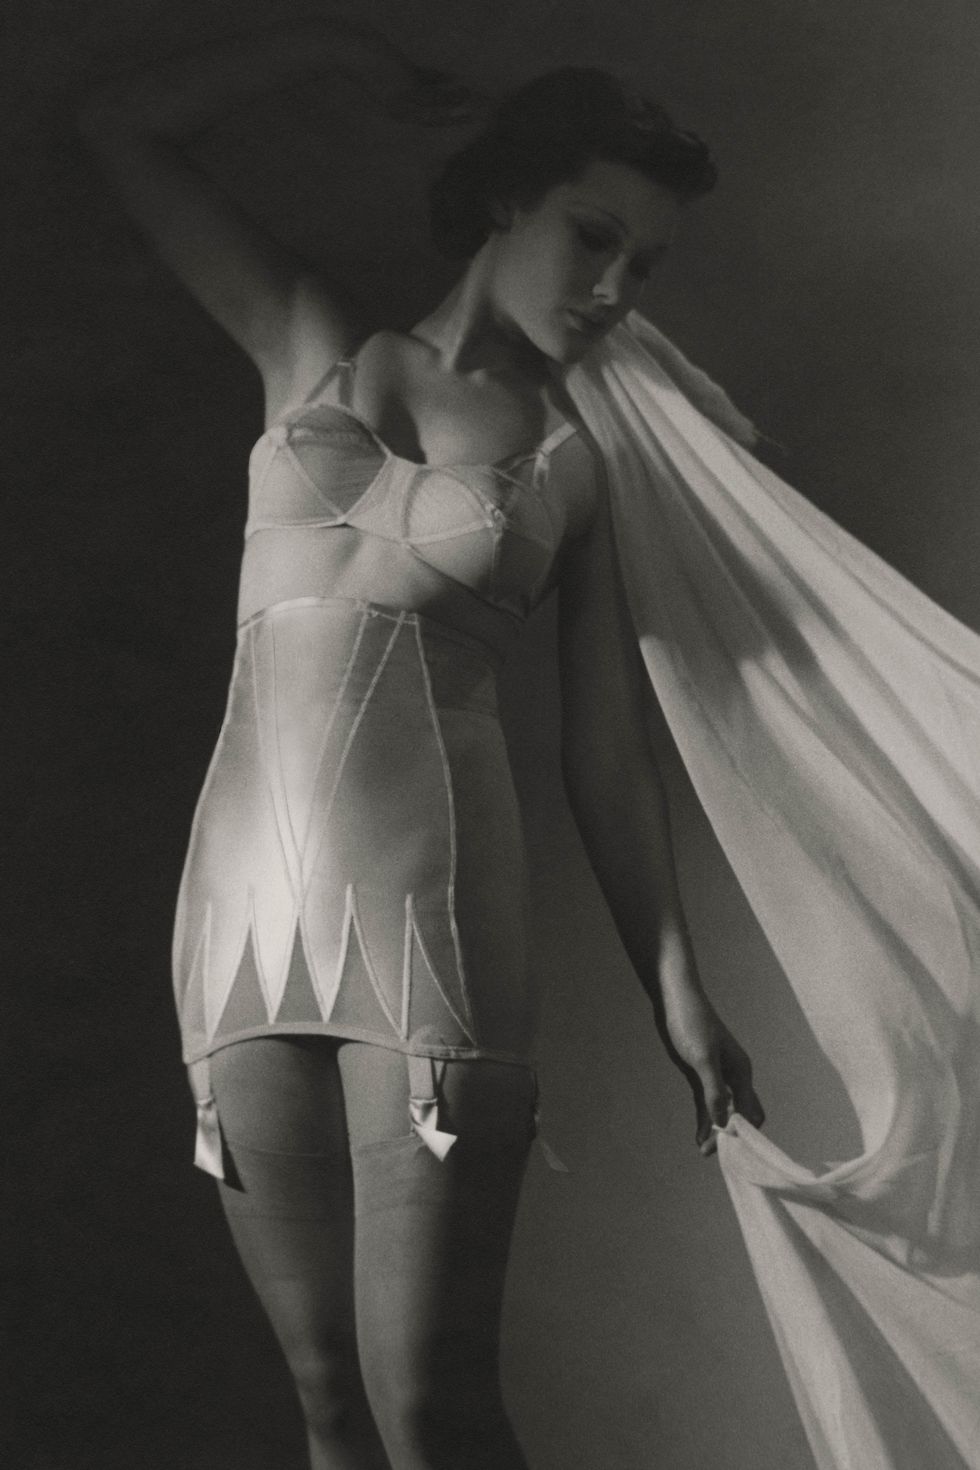 The Surprising Evolution of Lingerie — How Lingerie Has Changed